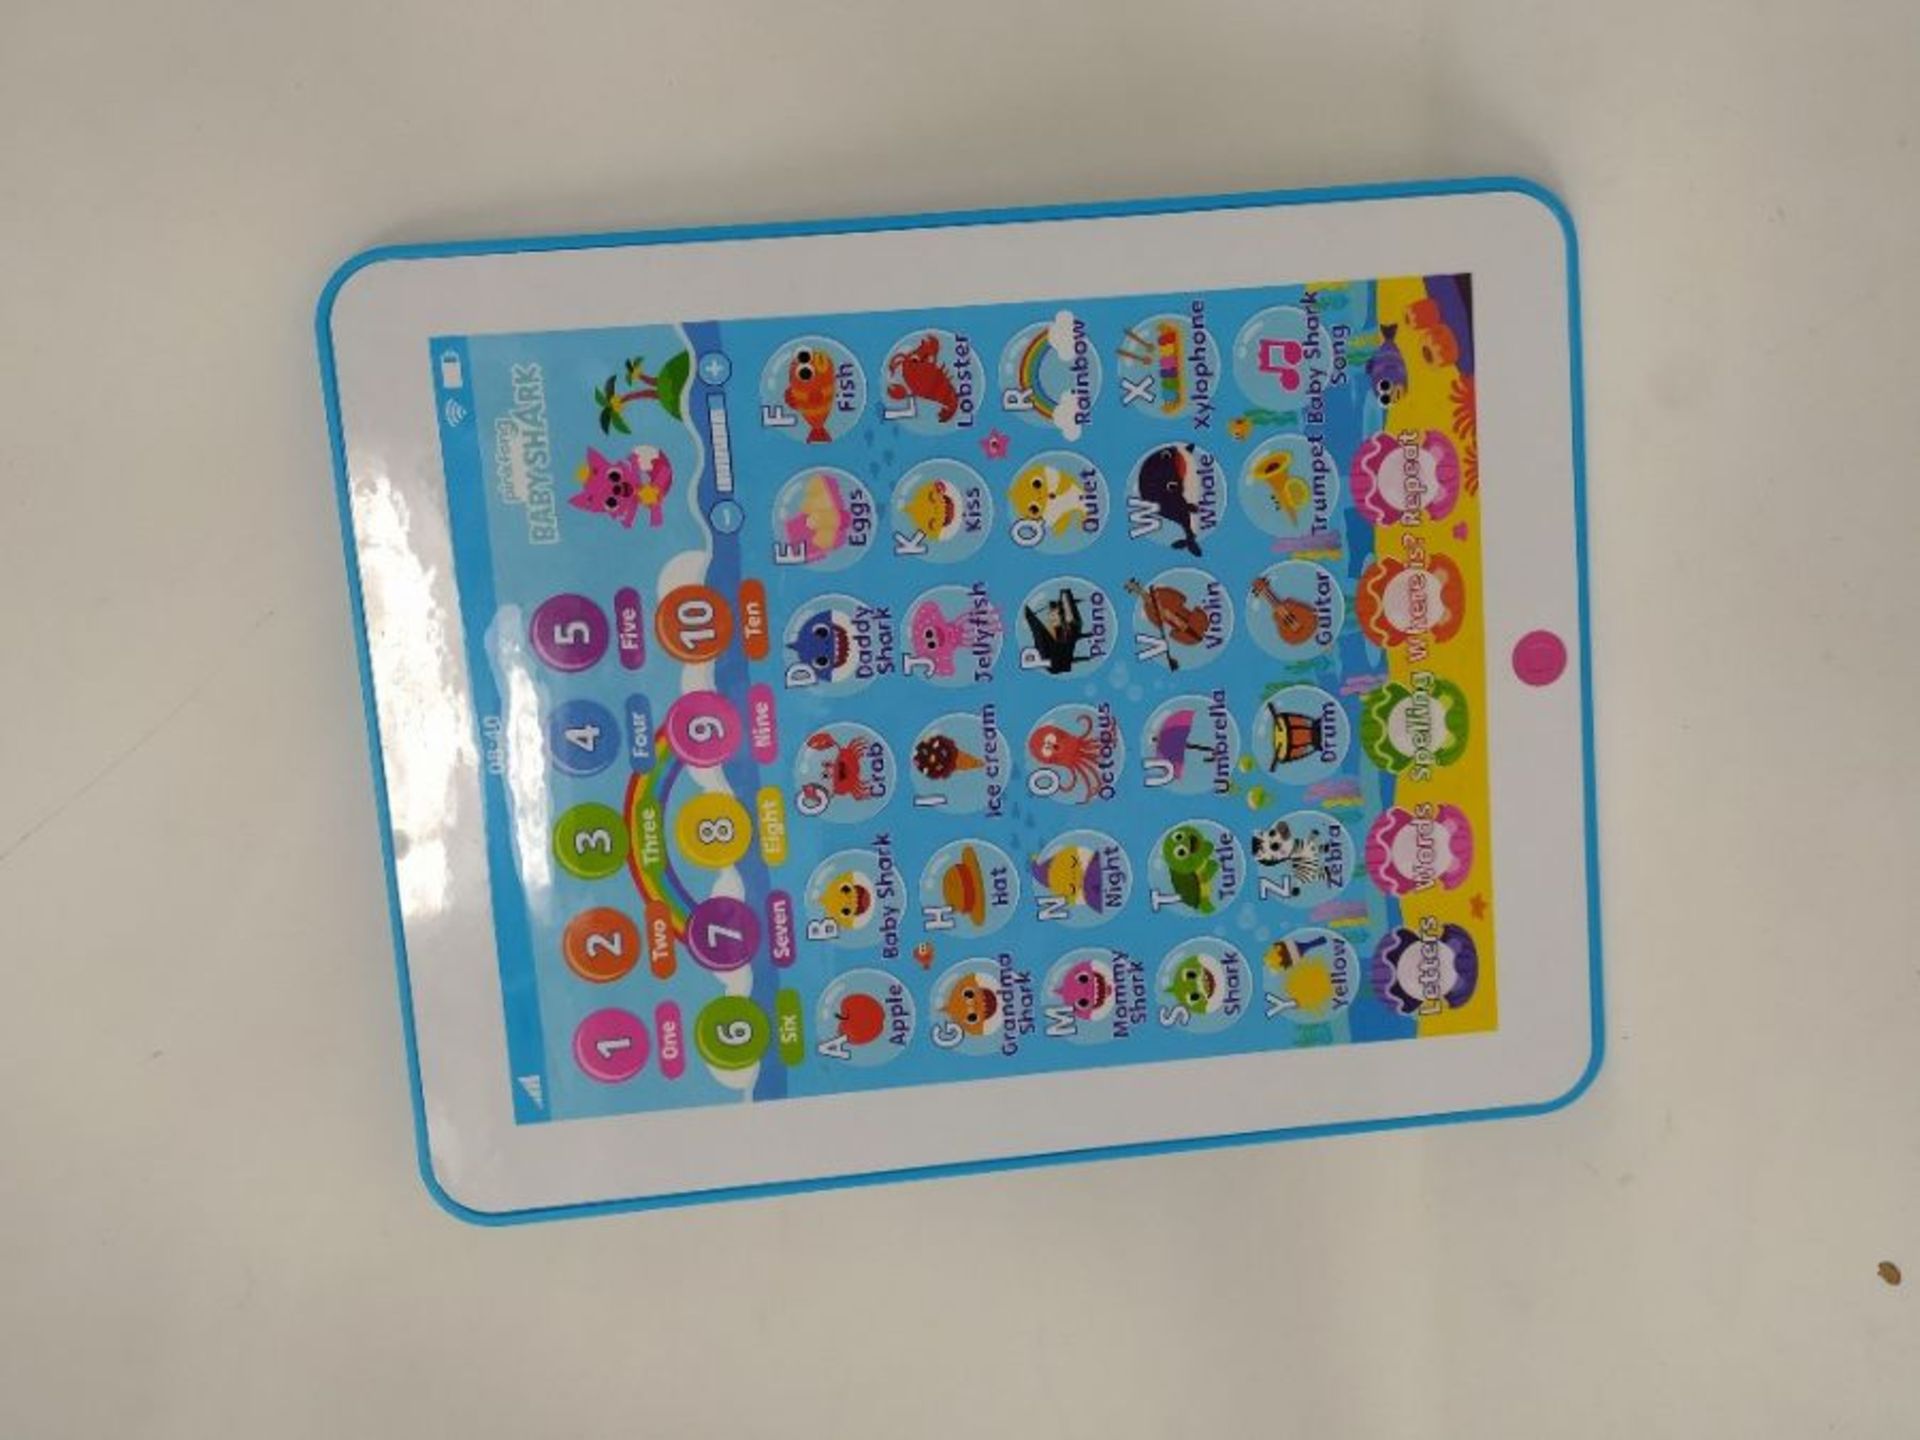 Pinkfong Baby Shark 61069 WowWee Pinkfong Tablet - Educational Preschool Toy - Image 2 of 2